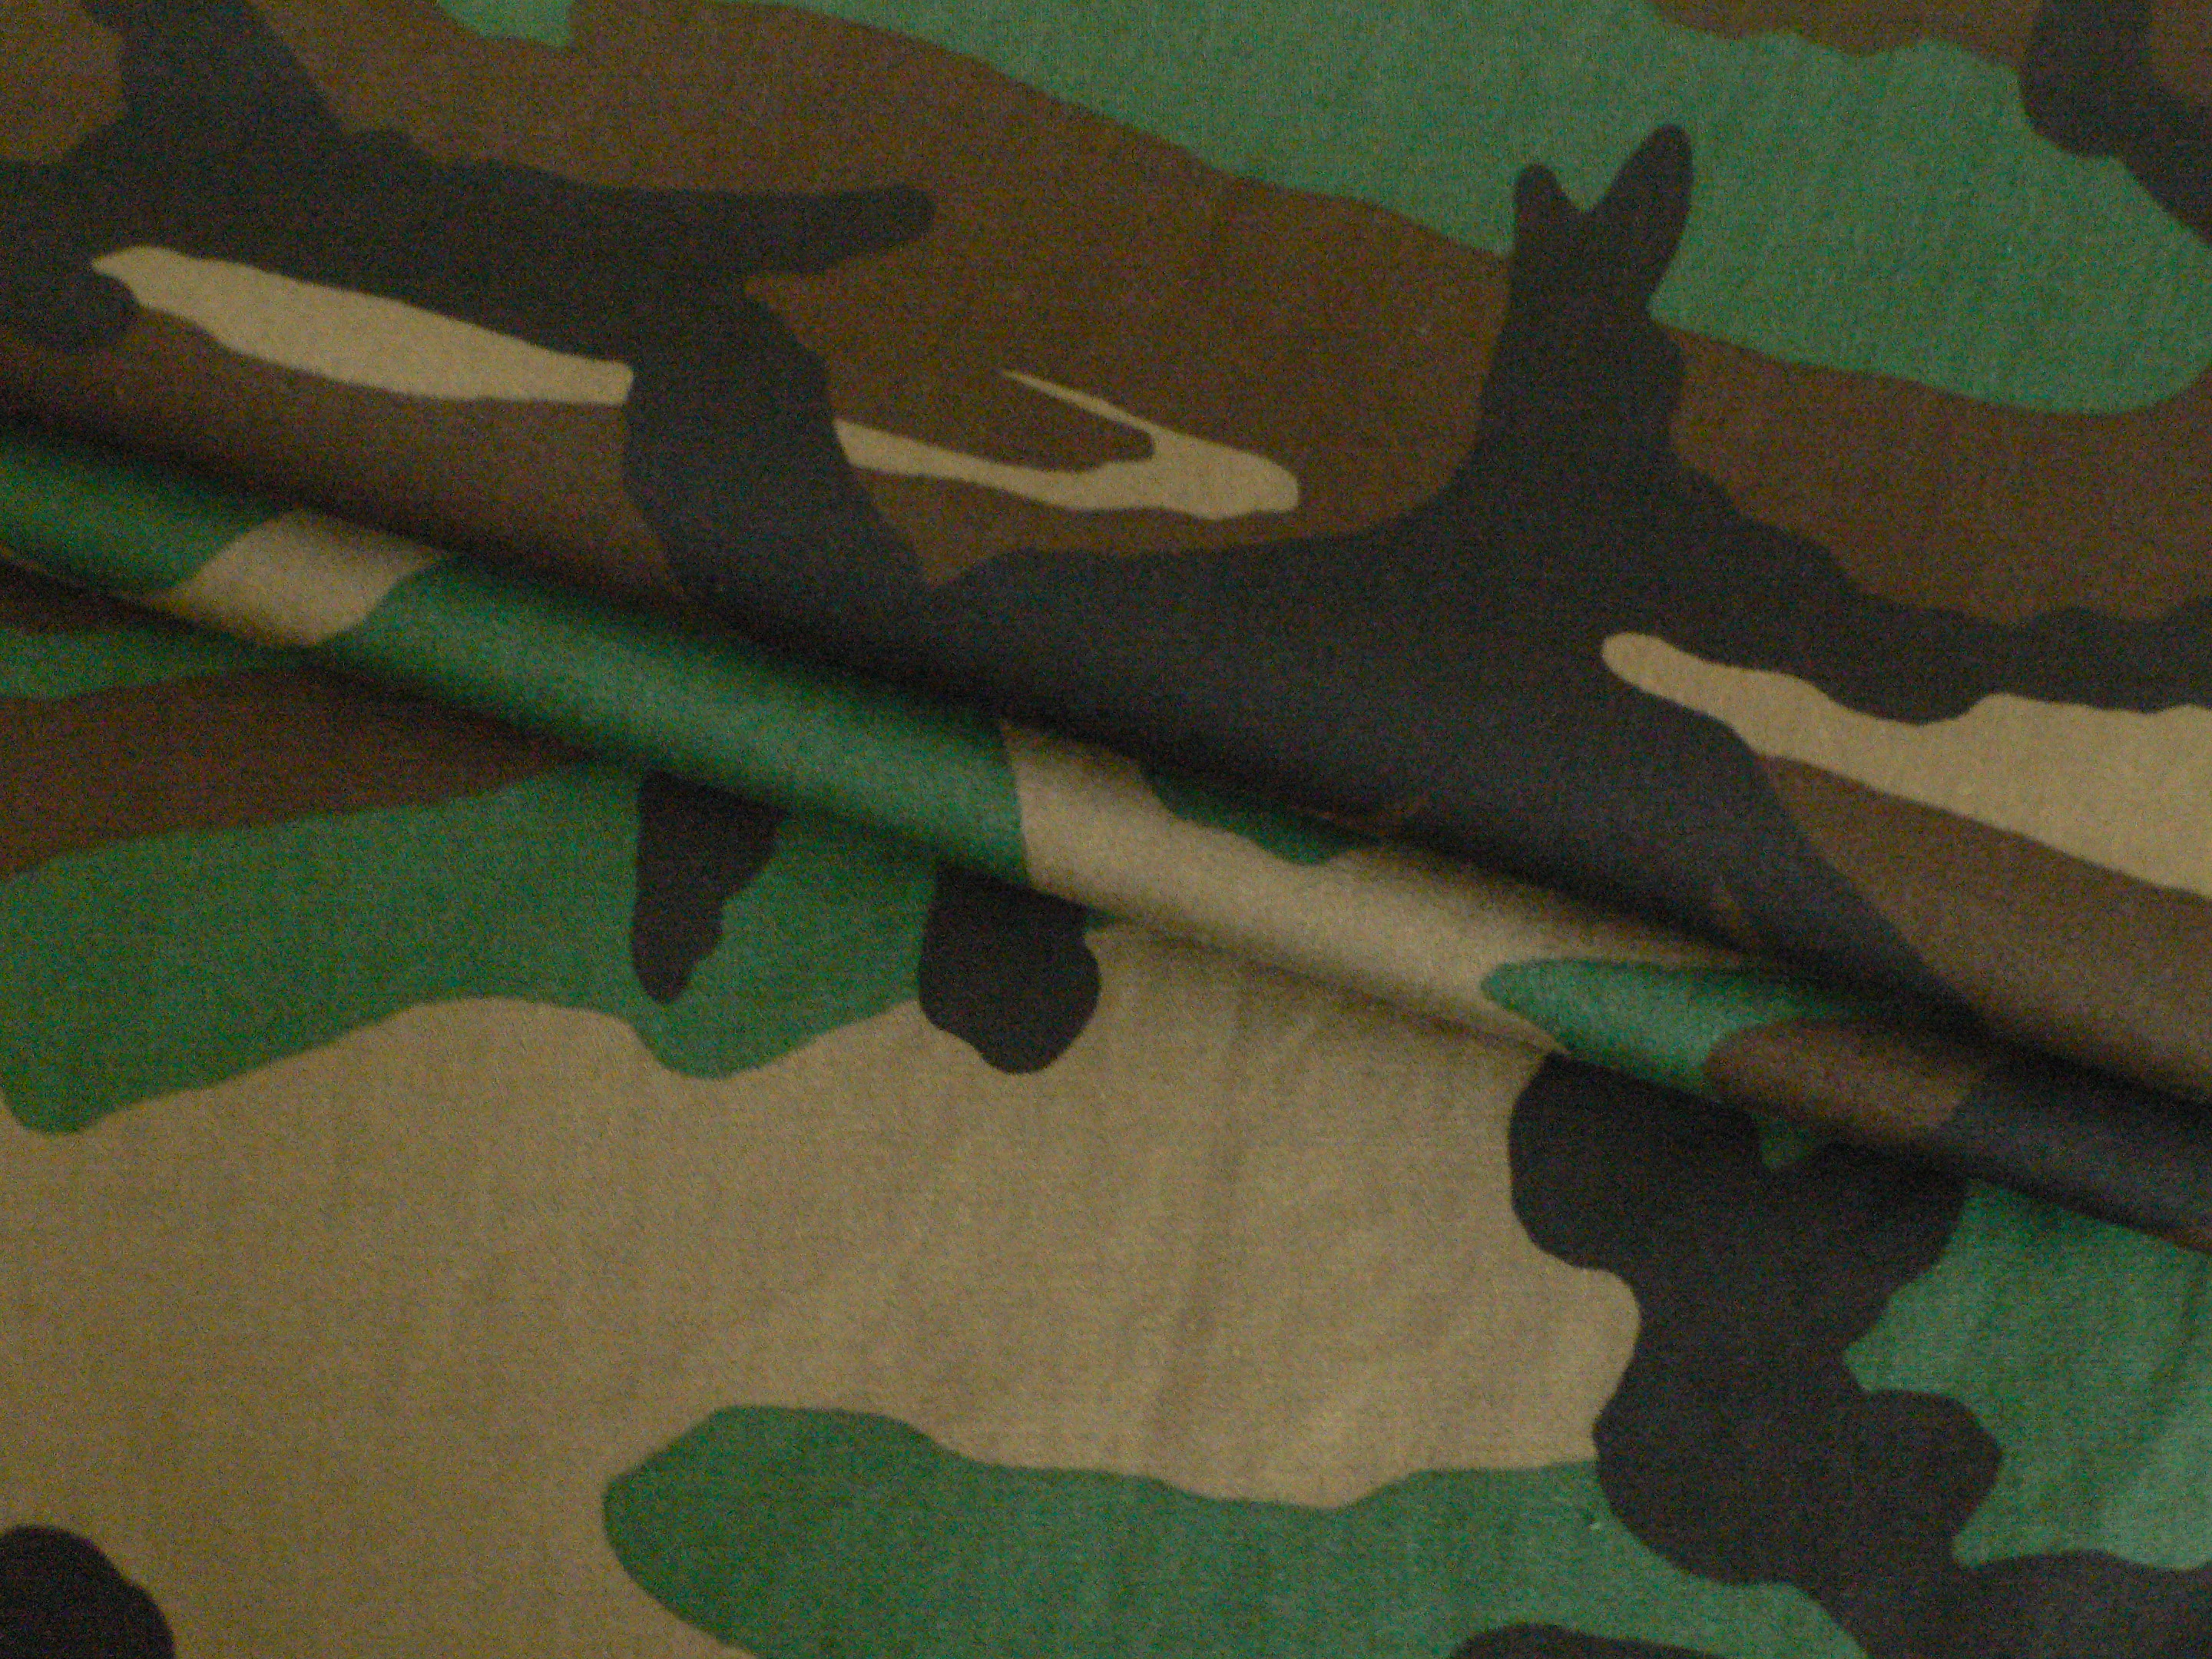 N/C Woodland Camouflage Fabric for the Middle East